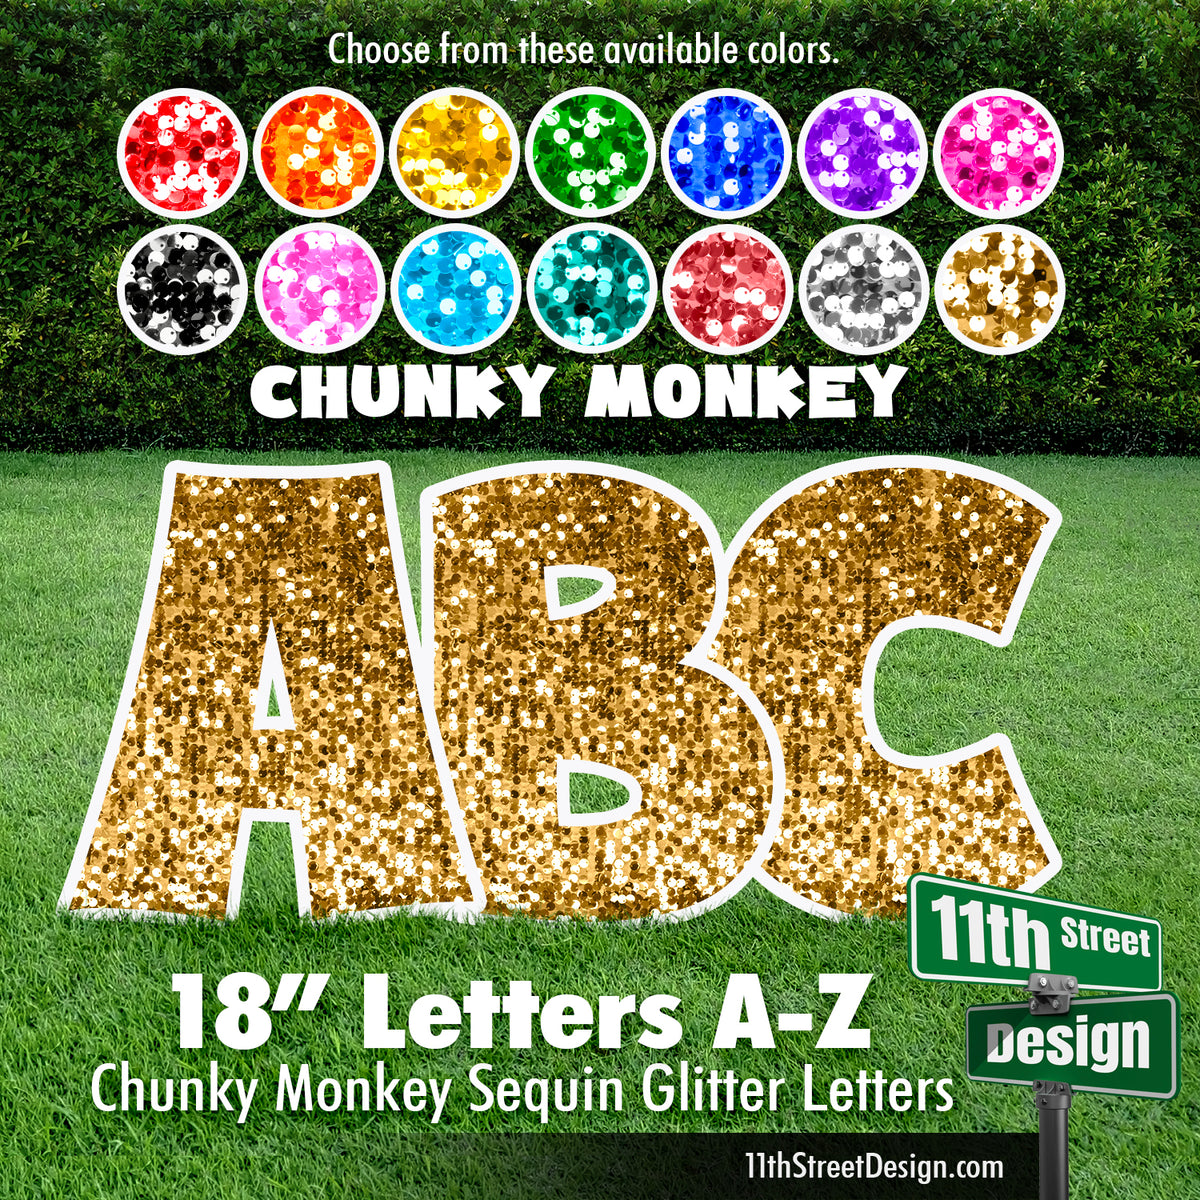 Sequin Glitter 18&quot; Chunky Monkey 26 Letter Alphabet Yard Card Set Includes Letters A-Z